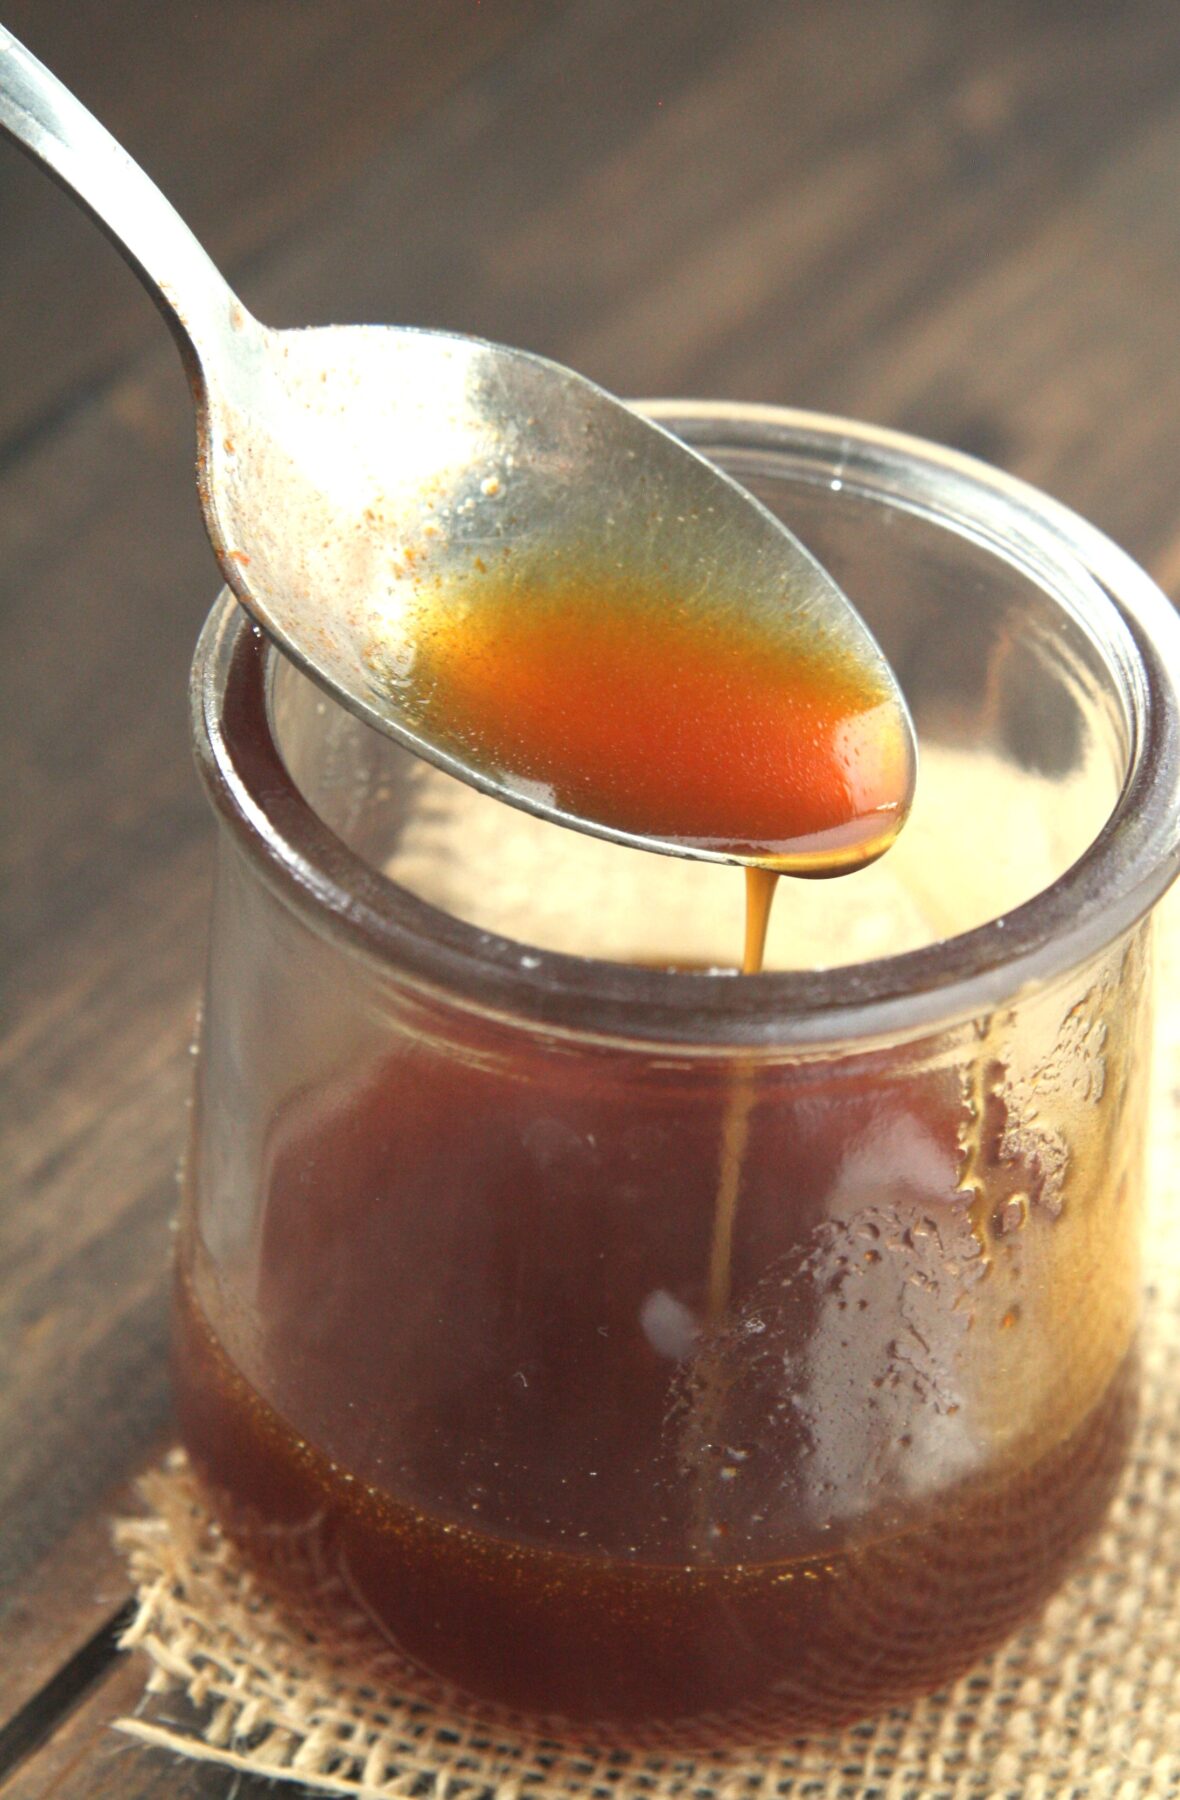 Create your own version of Mike's Hot Honey recipe with just two ingredients and check out some creative ways to incorporate this sweet and spicy condiment into your favorite dishes.